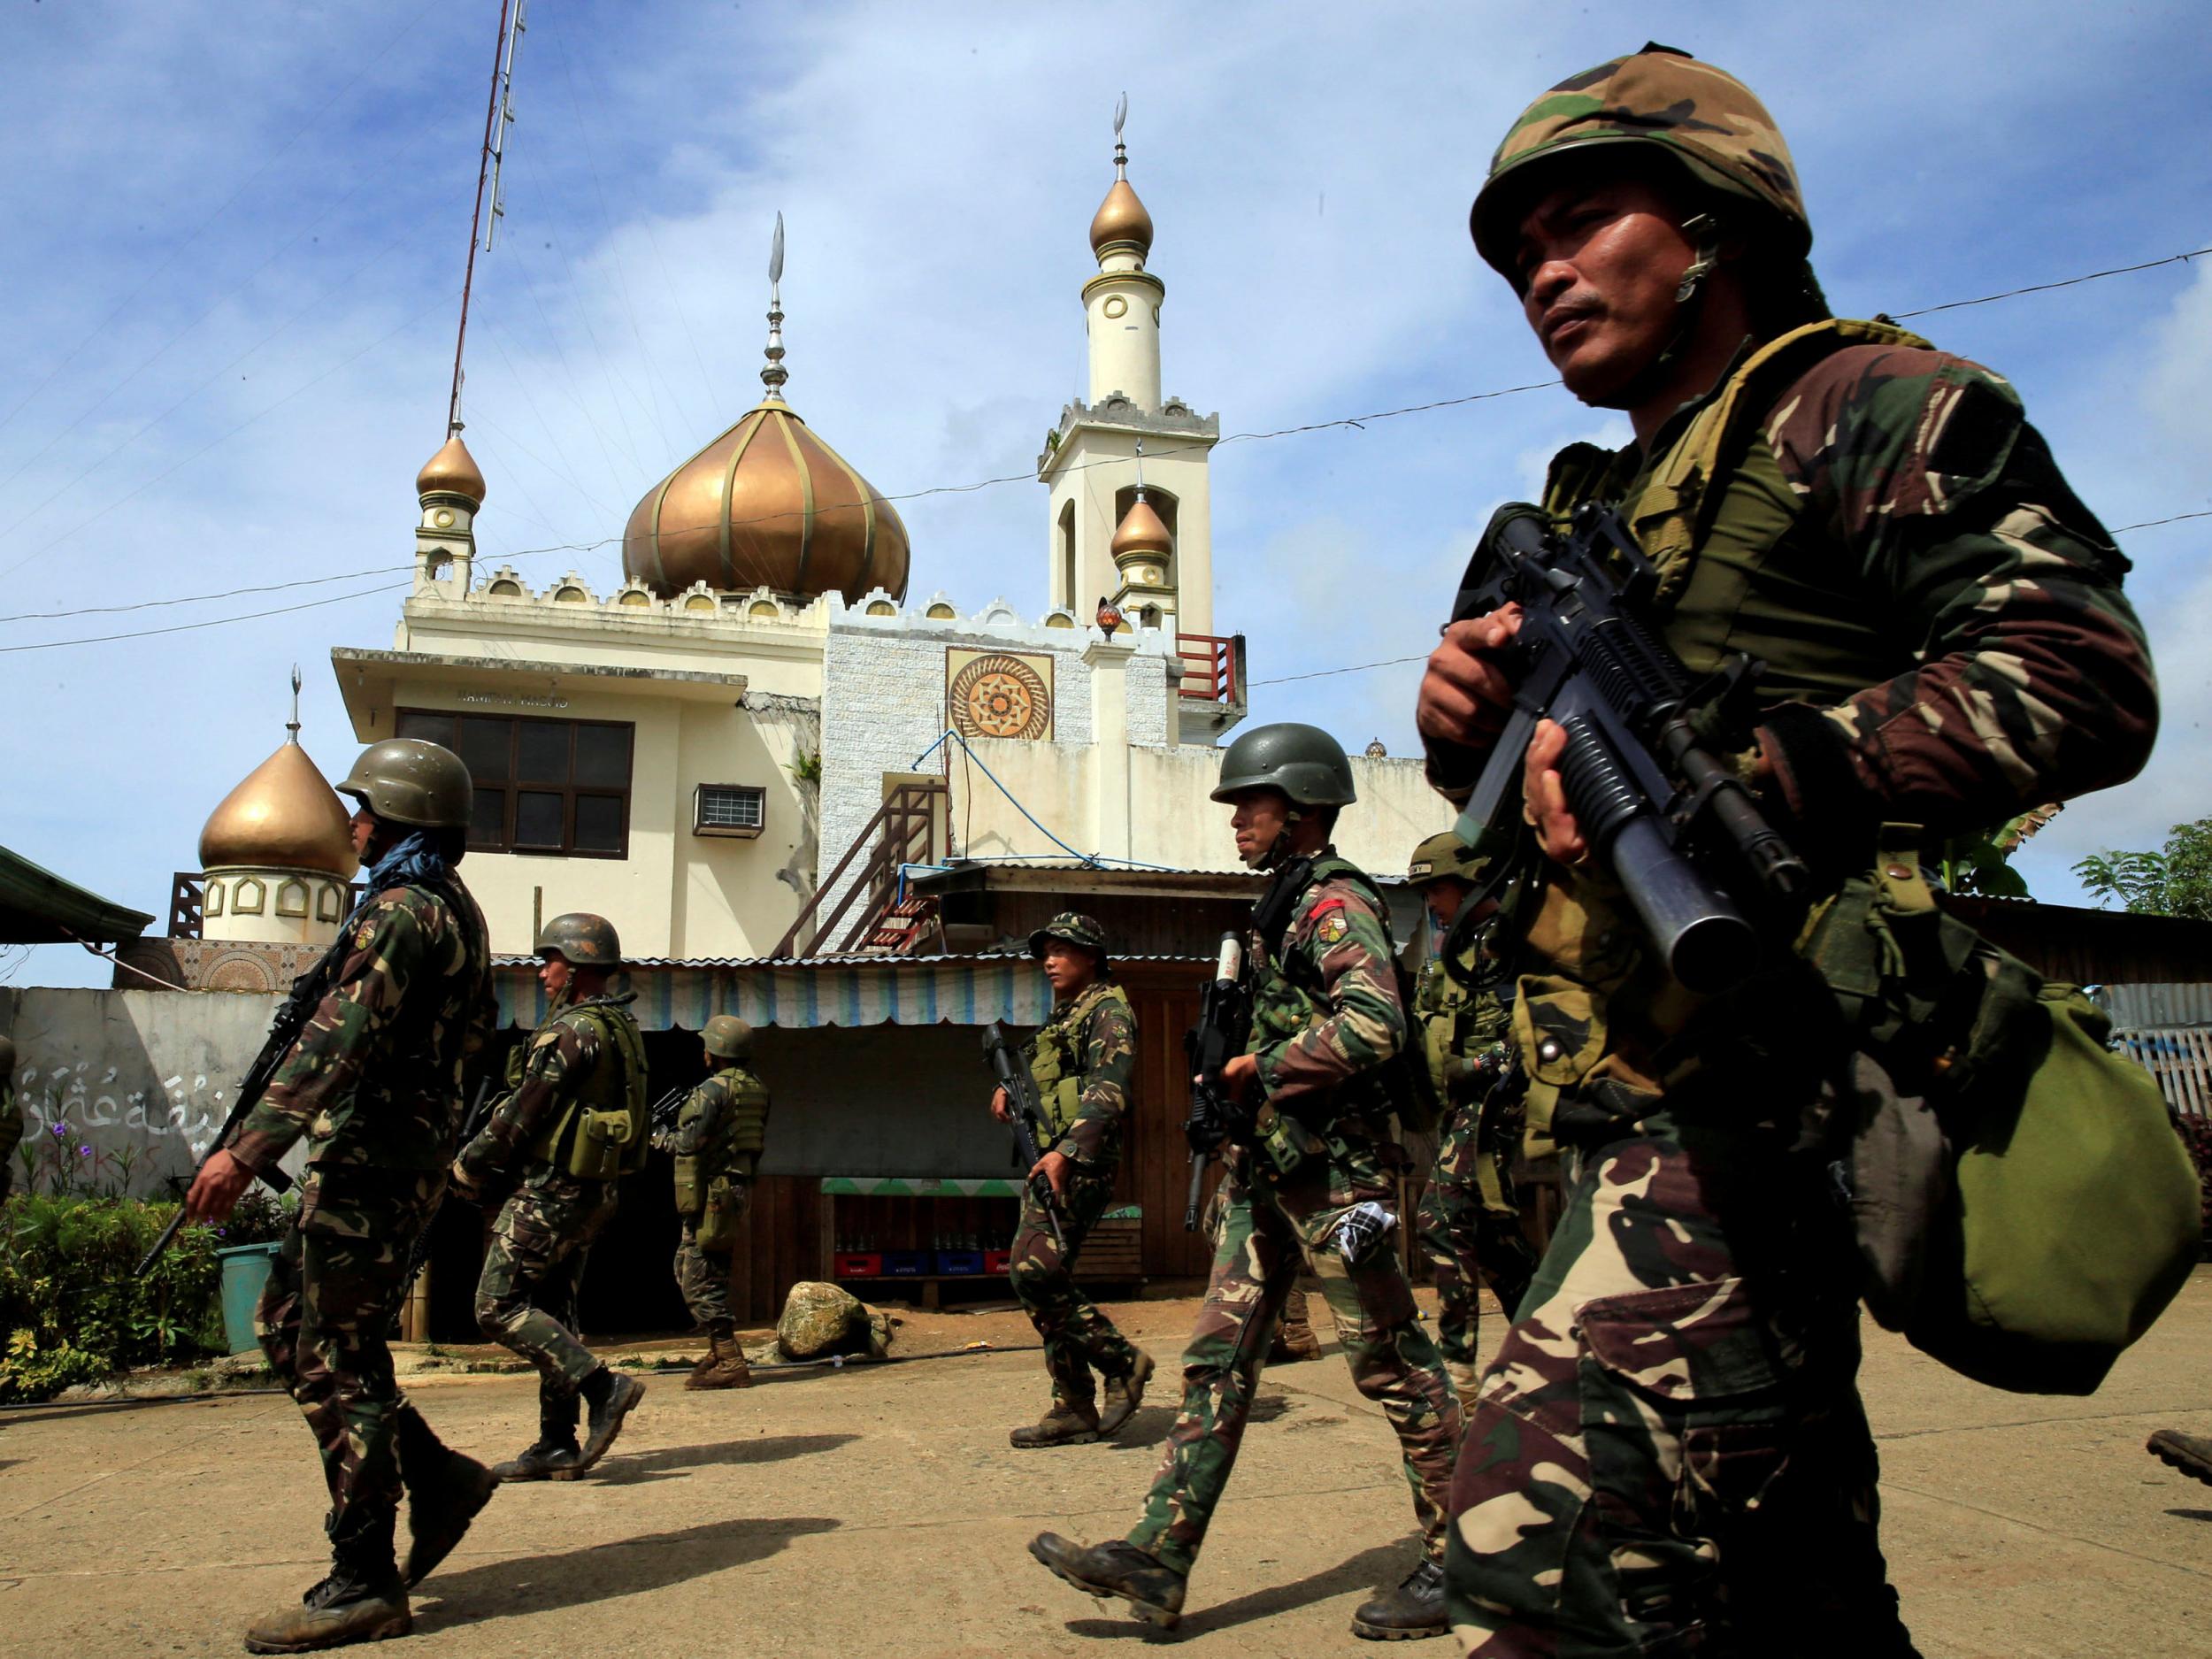 Government troops are waging a fierce battle with local Islamic militants in Marawi